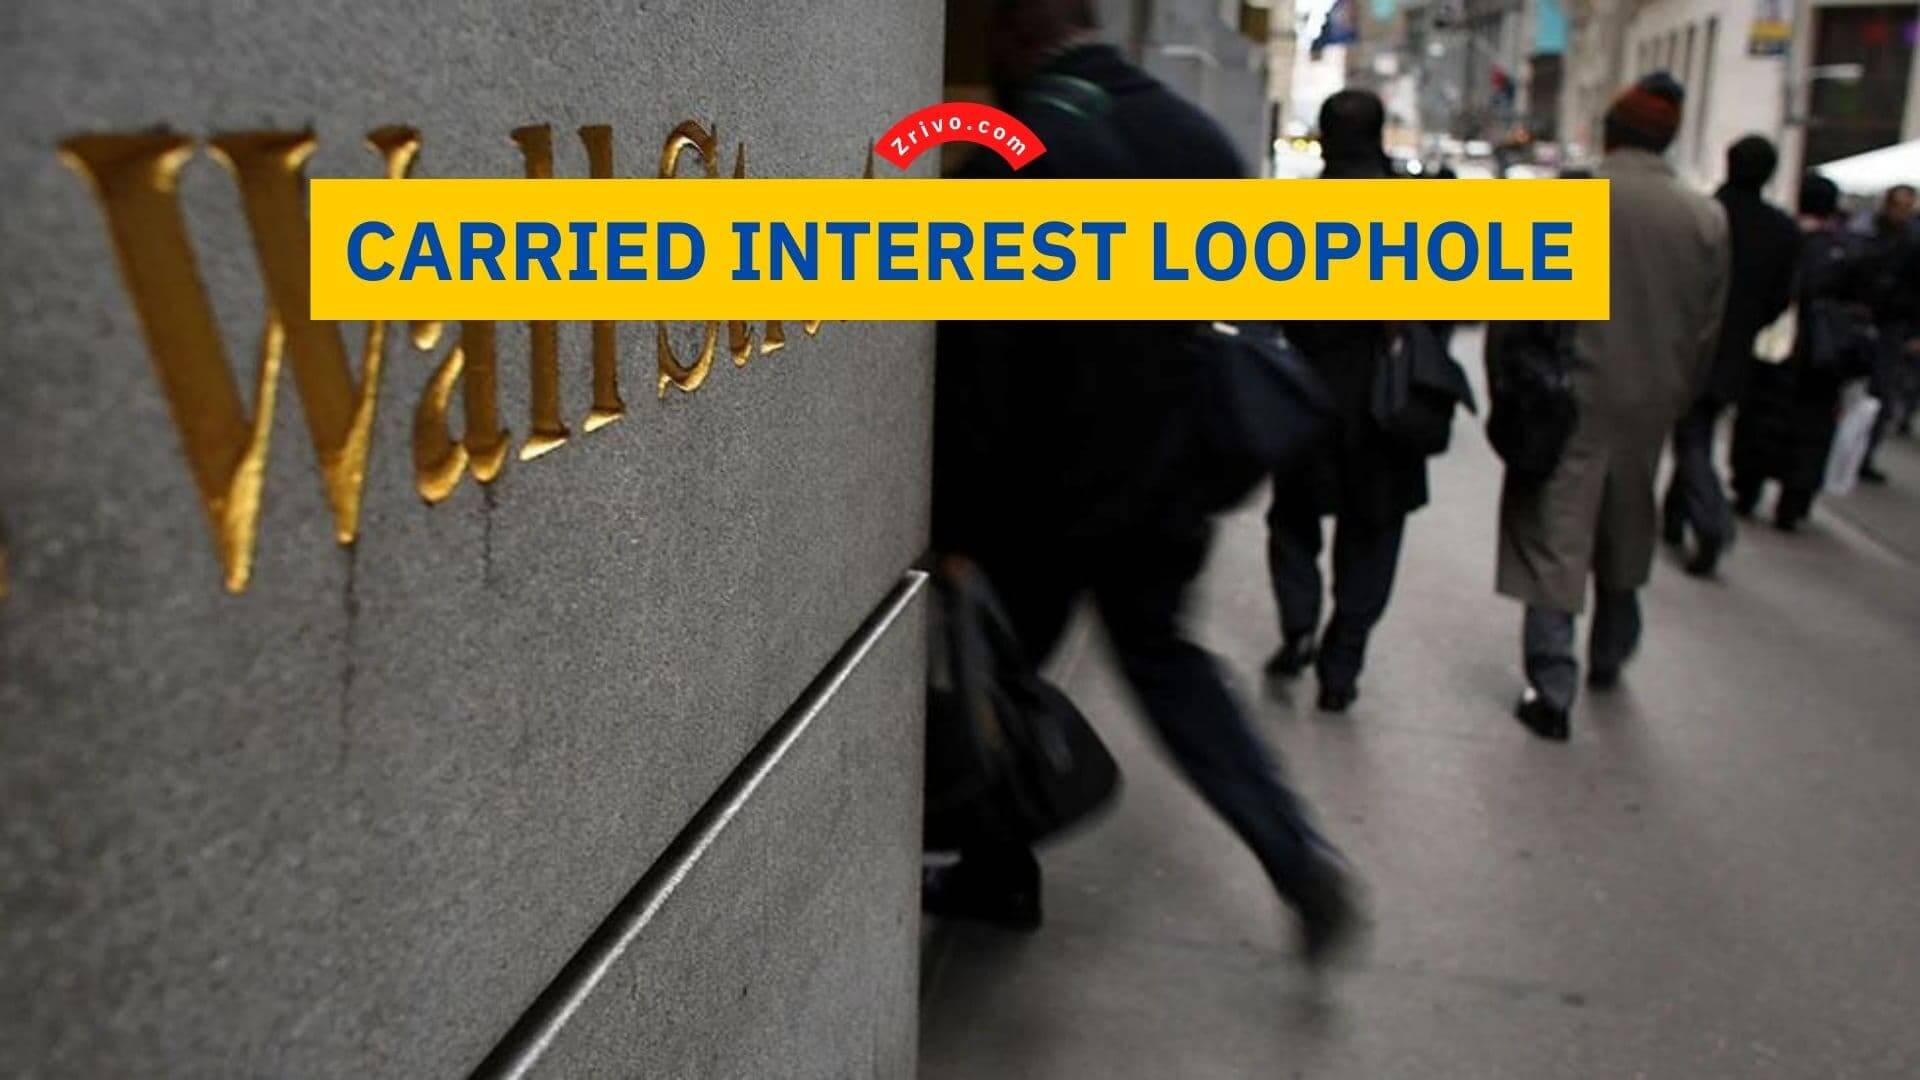 Carried-Interest-Loophole-Zrivo-Cover-1